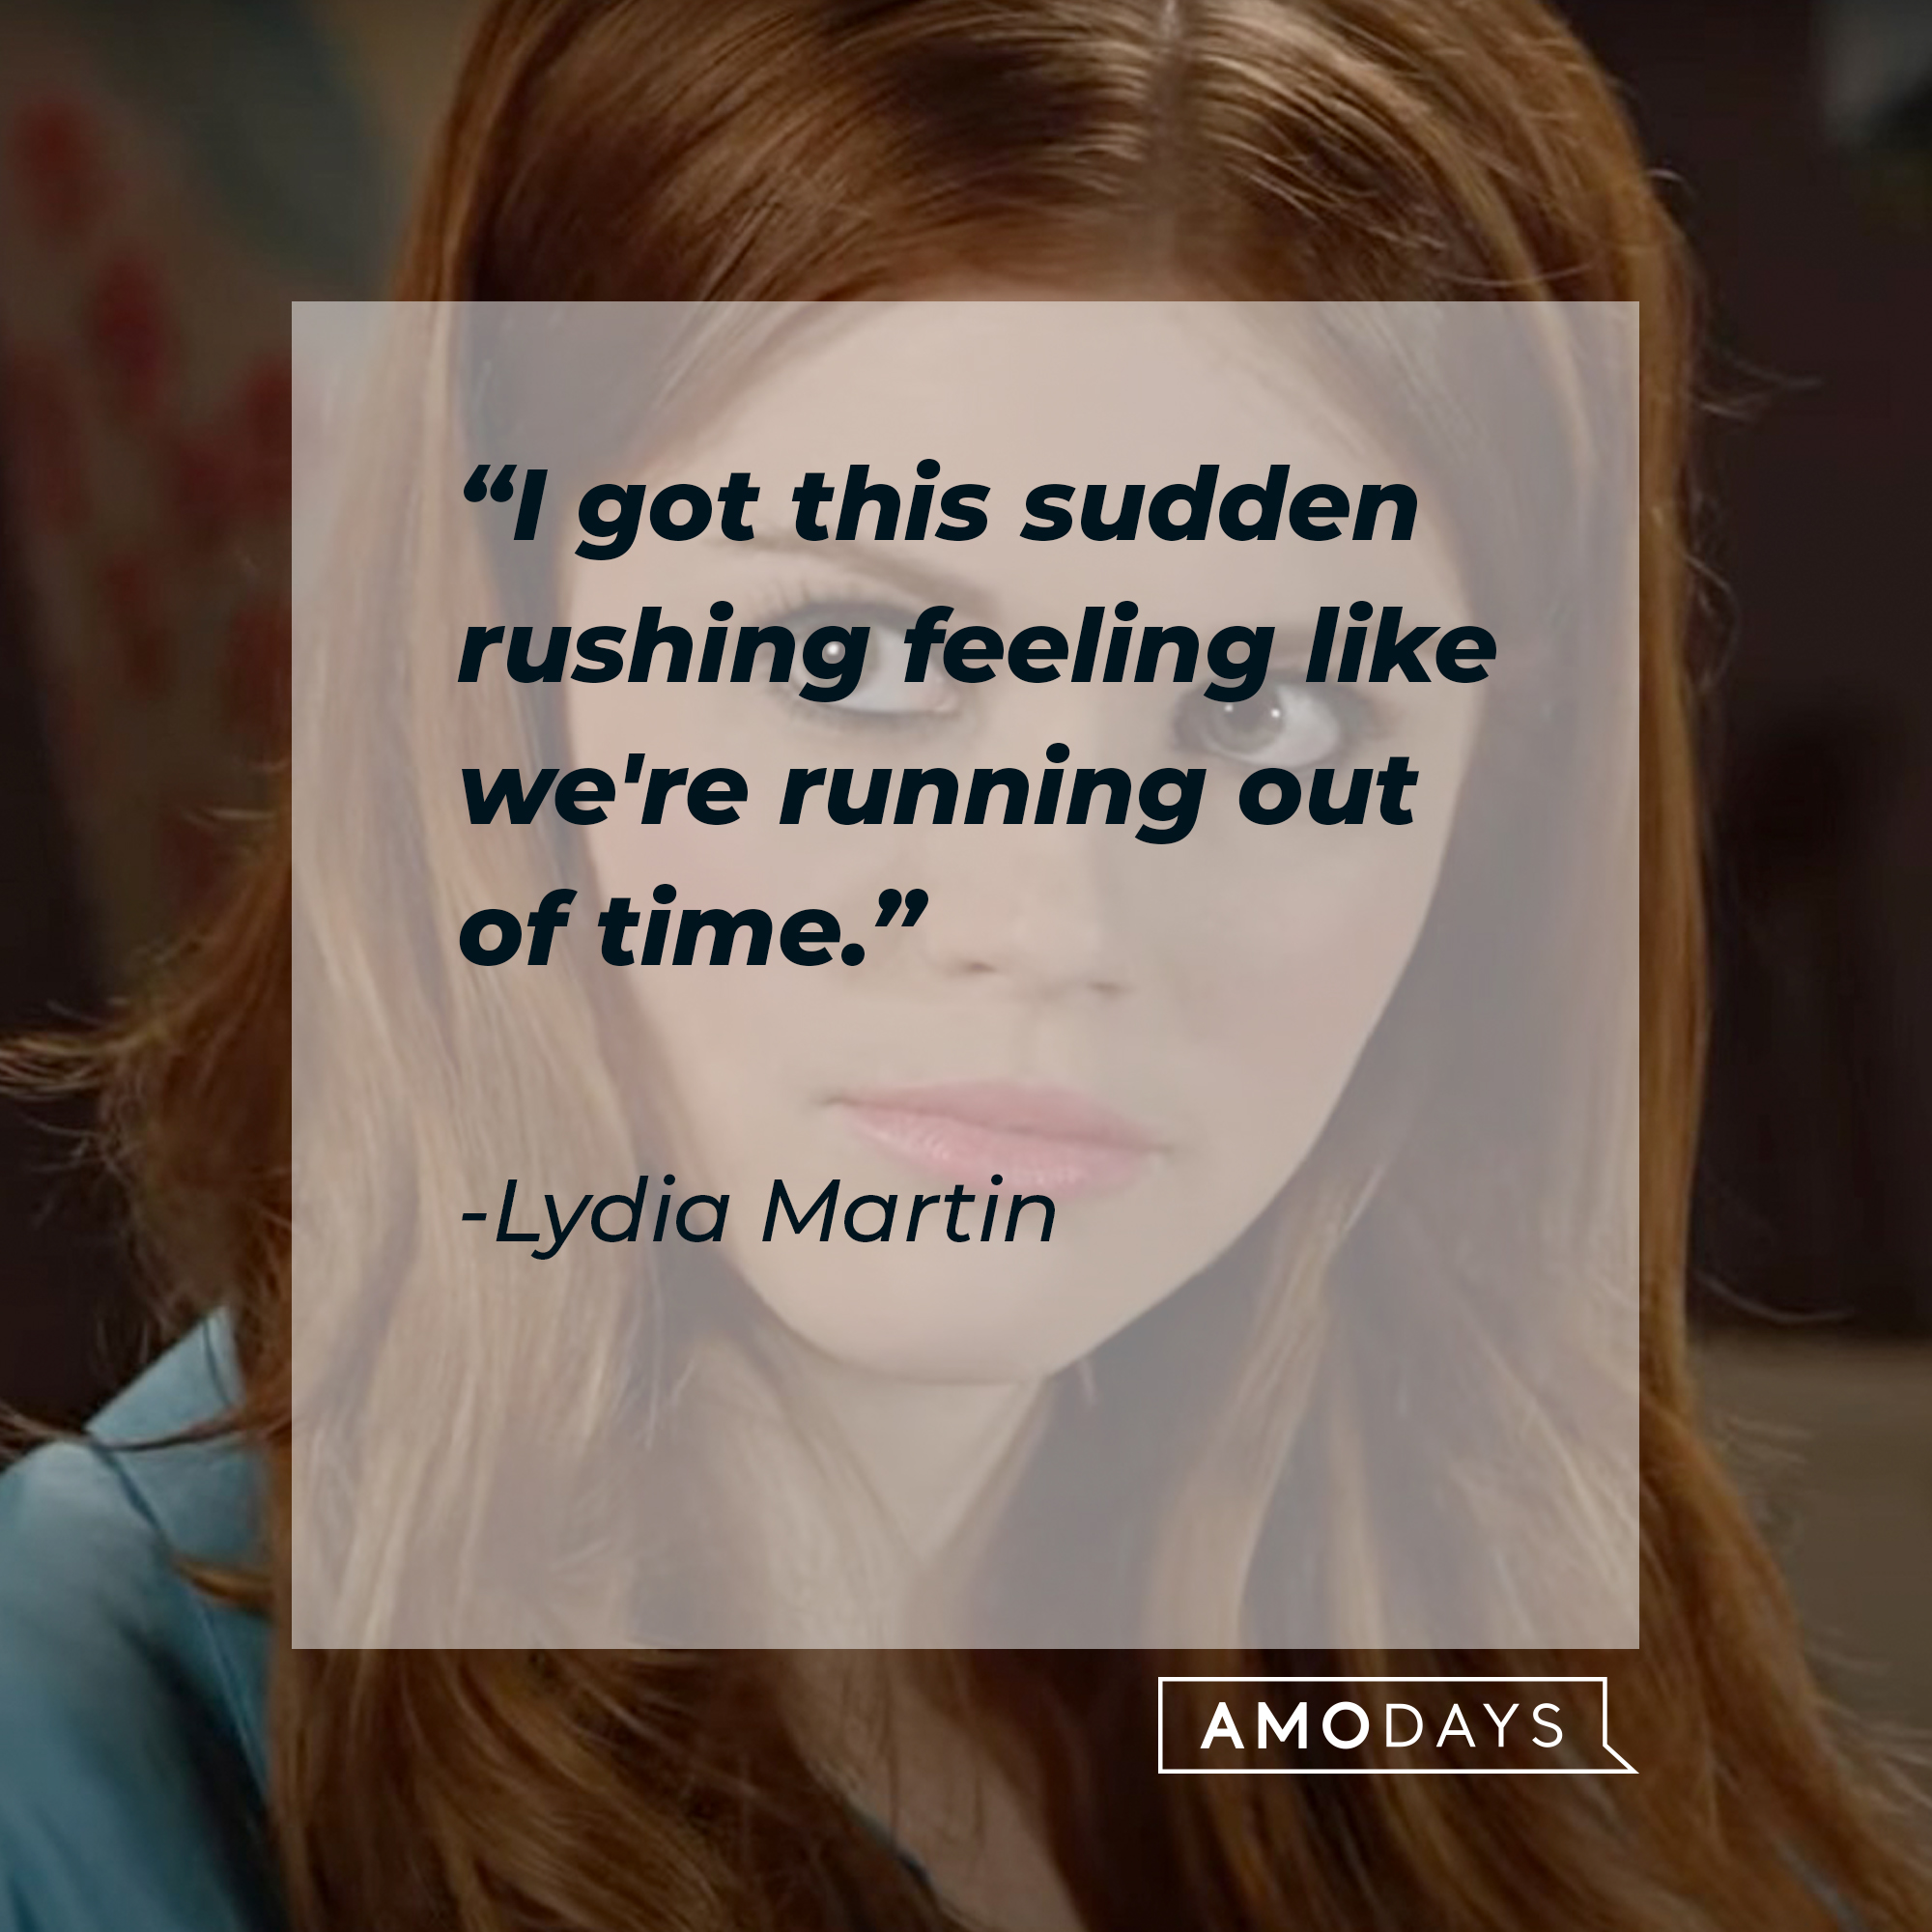 Lydia Martin with her quote: “I got this sudden rushing feeling like we’re running out of time.” | Source: facebook.com/TeenWolf